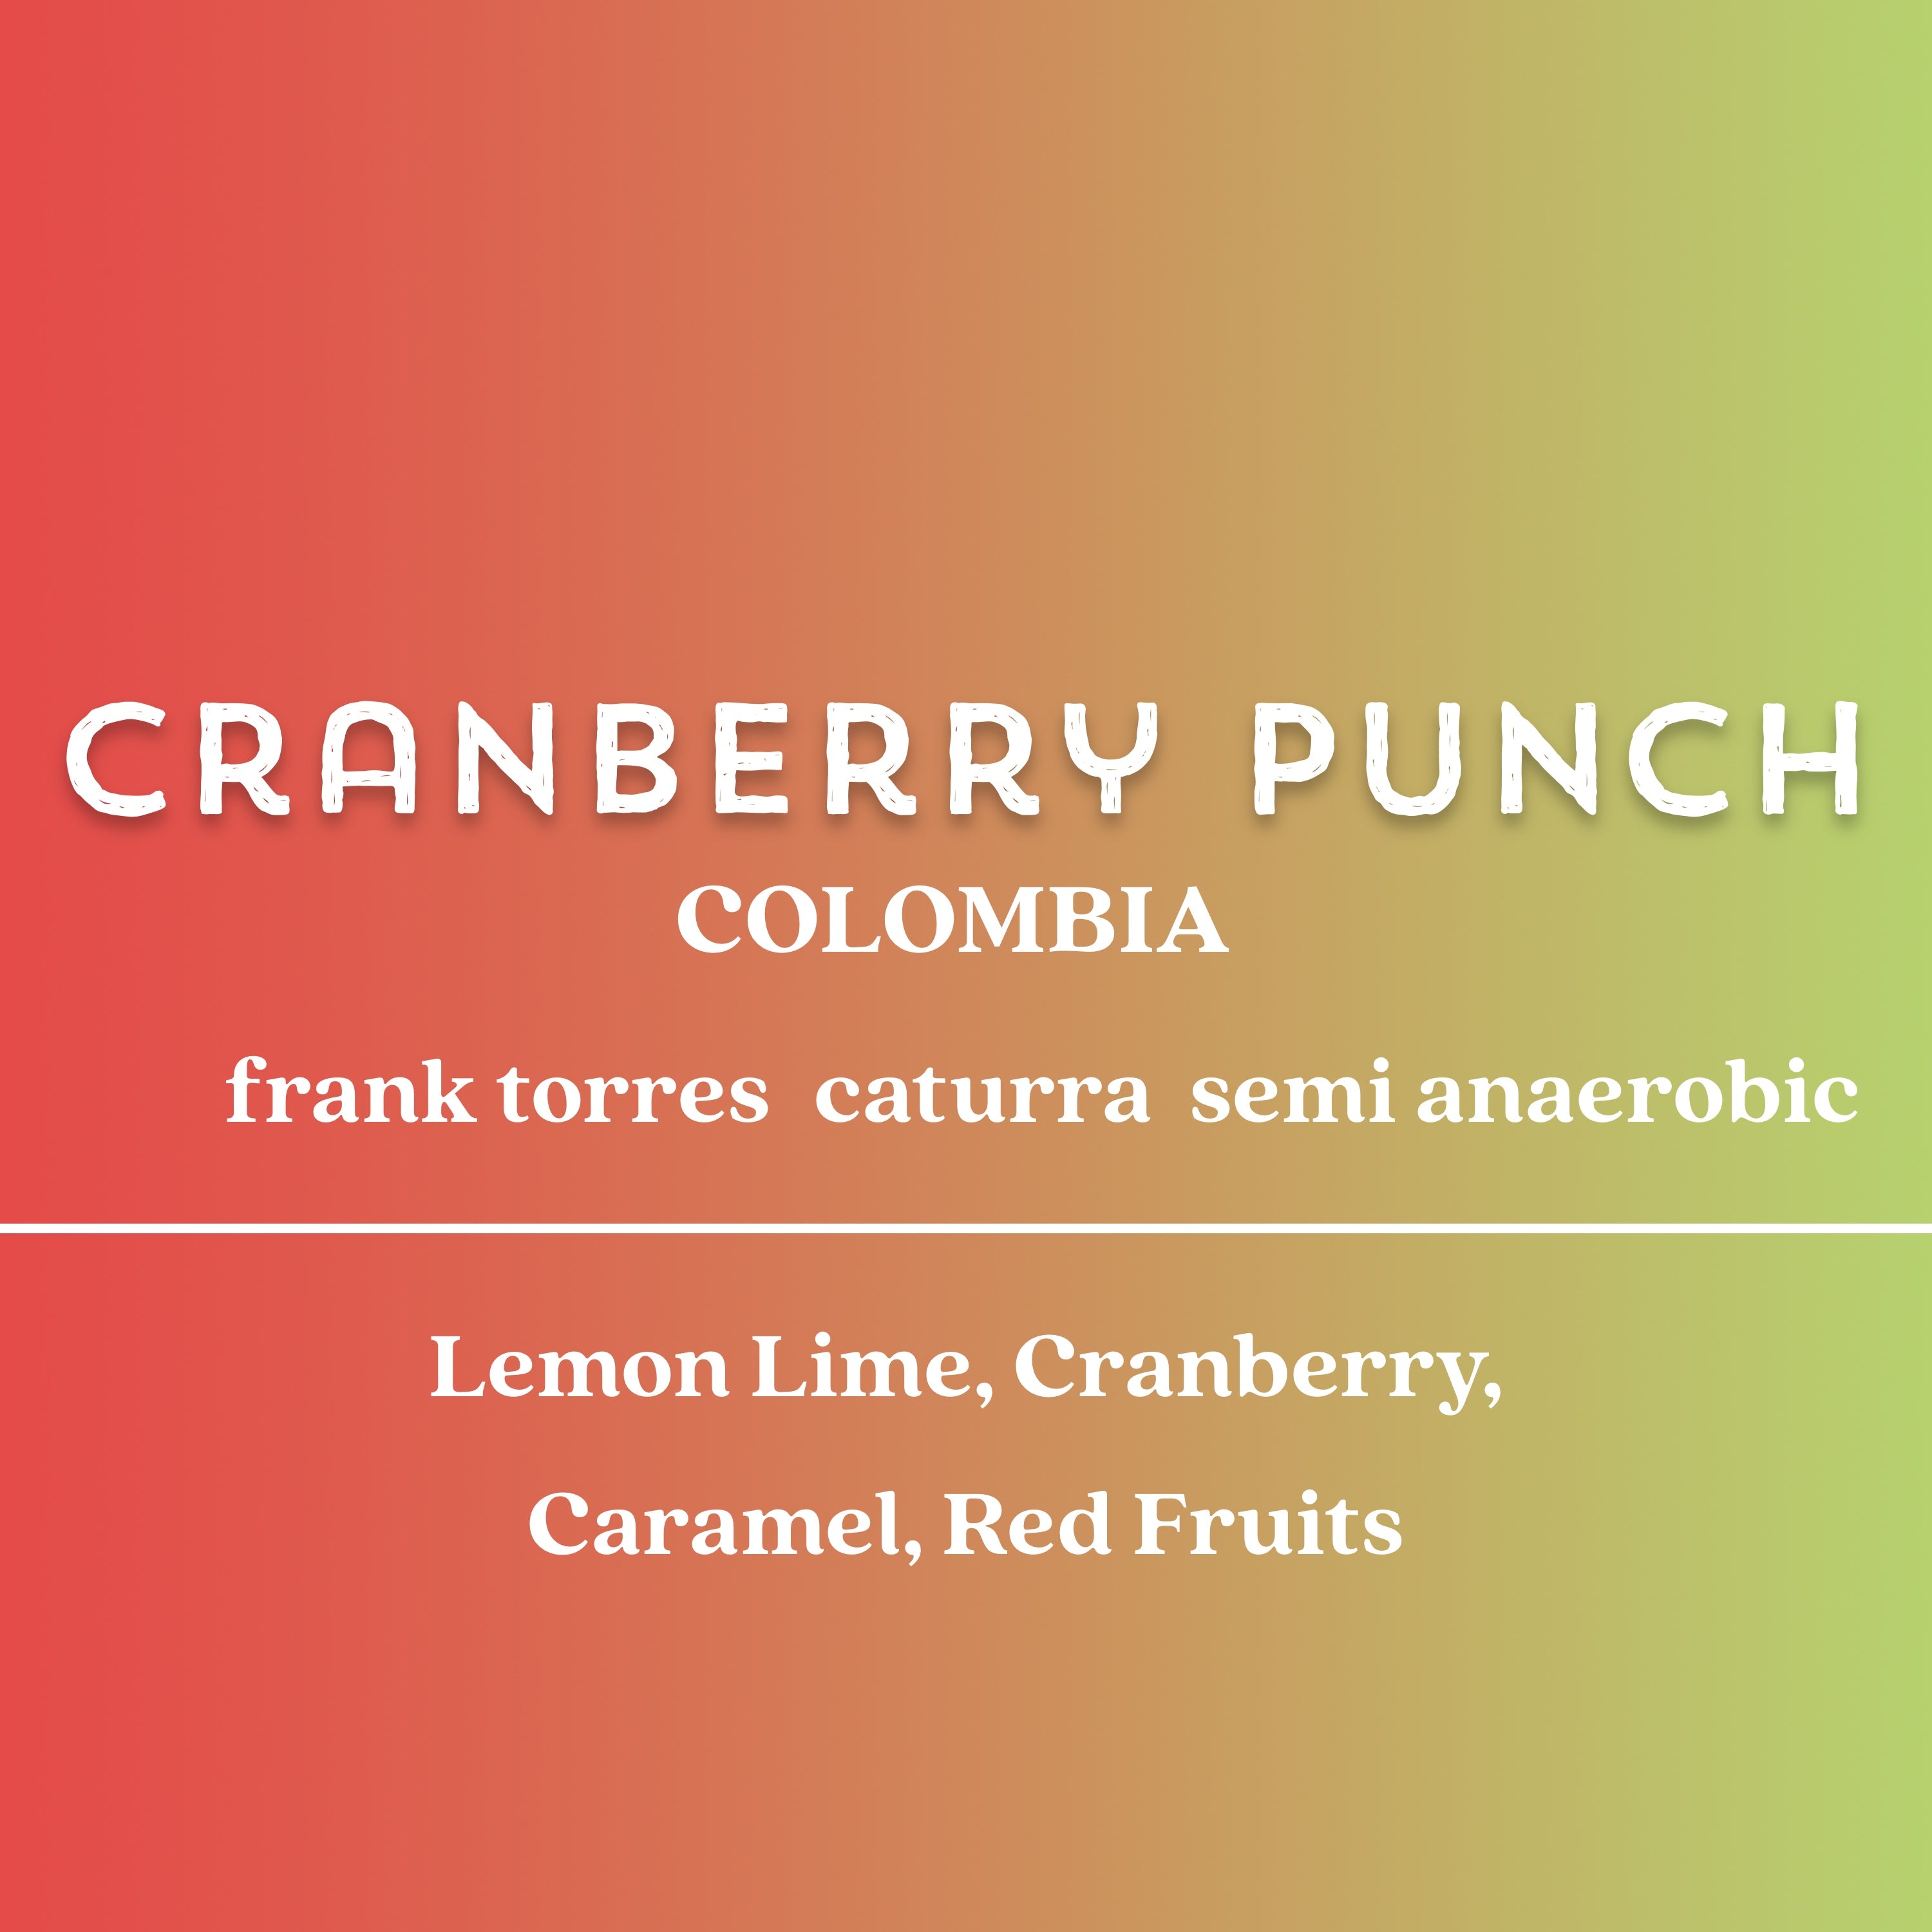 Cranberry Punch - Frank Torres Colombia